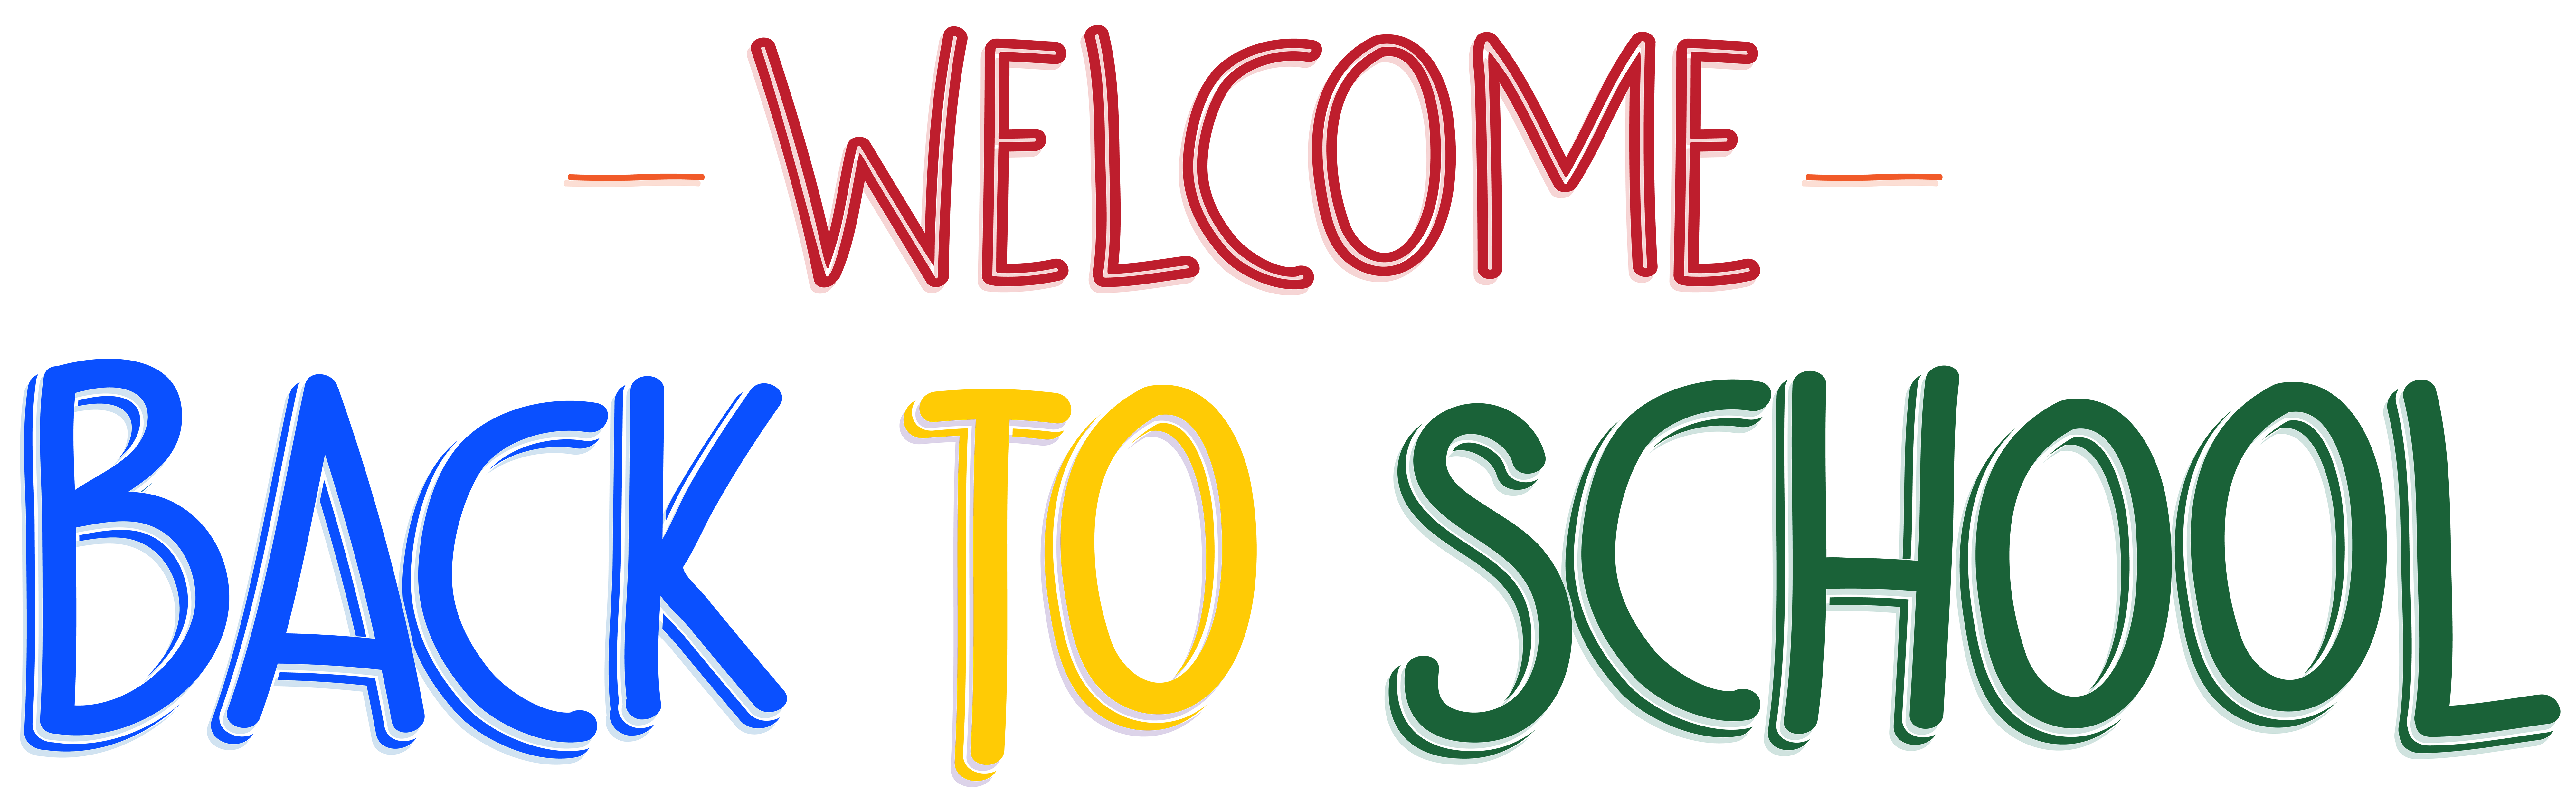 Welcome Back Pencil Clip Art 